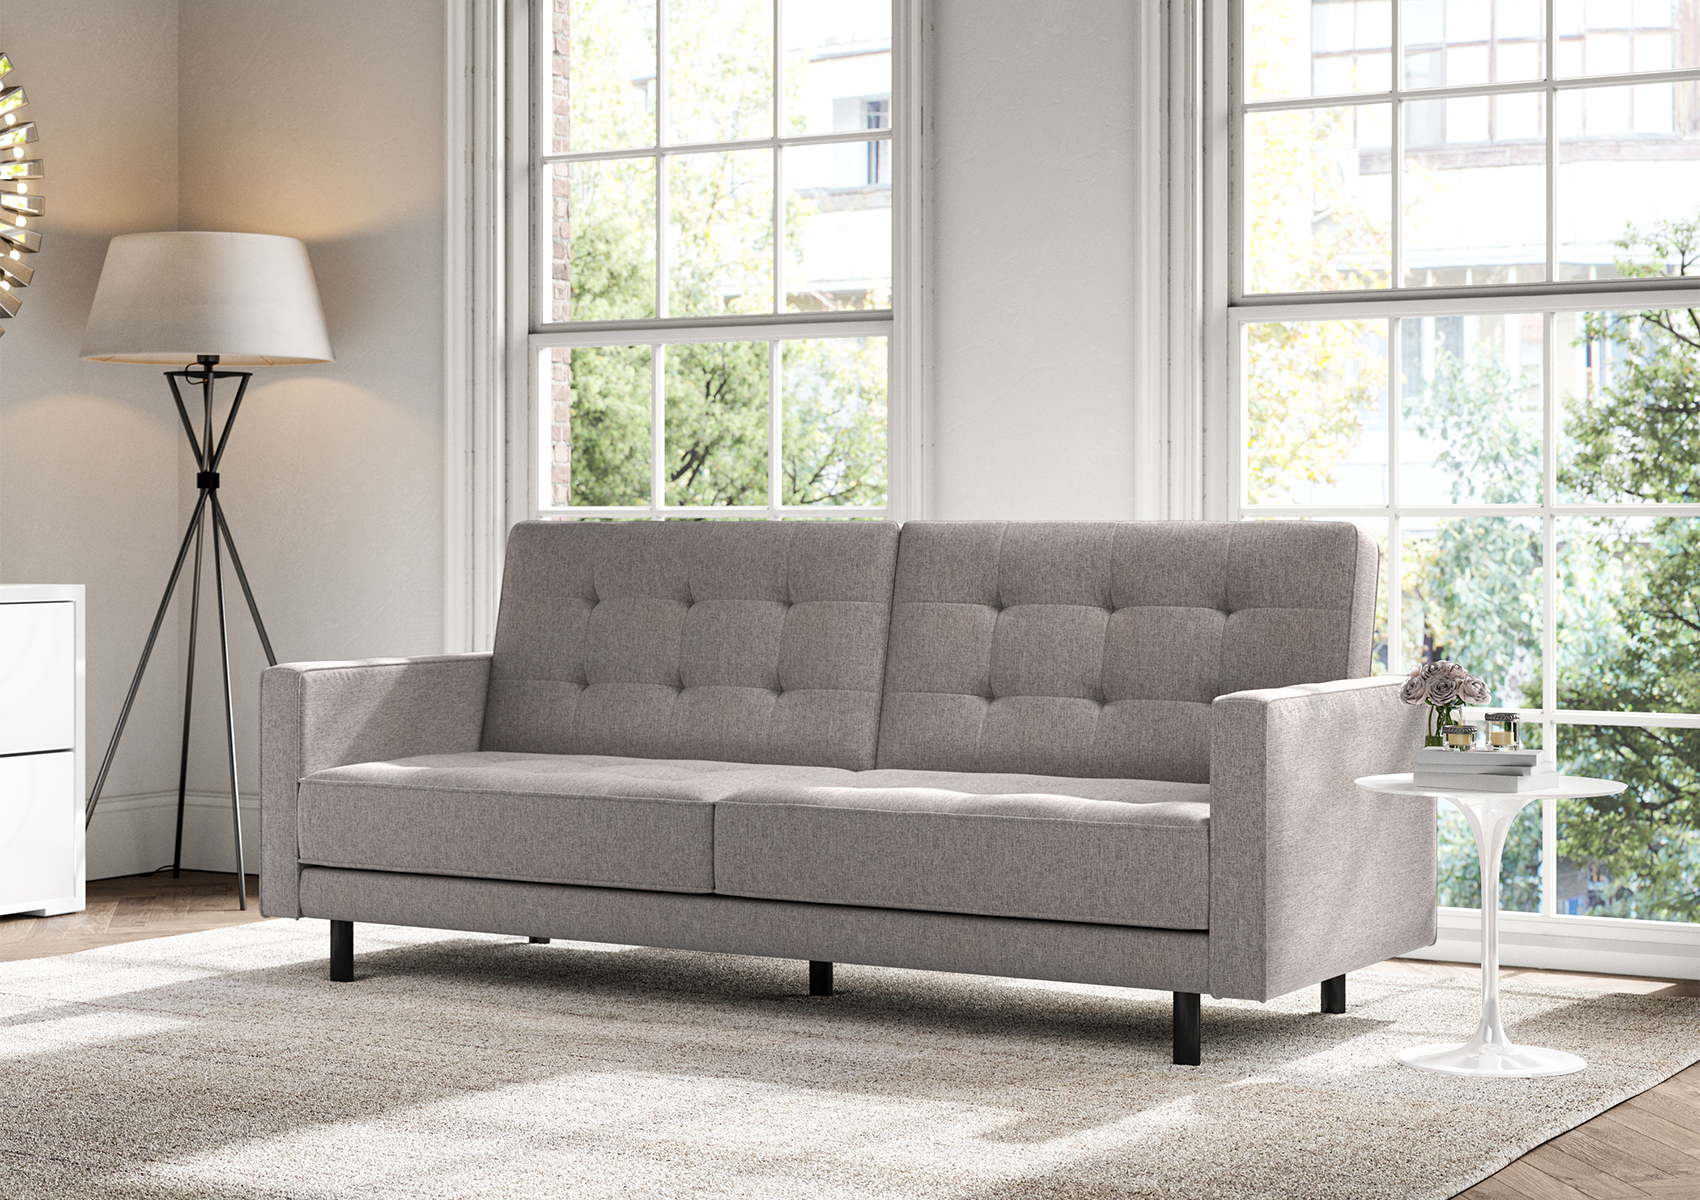 View Florence Pocket Rest Linear Grey Sofa Bed Time4Sleep information